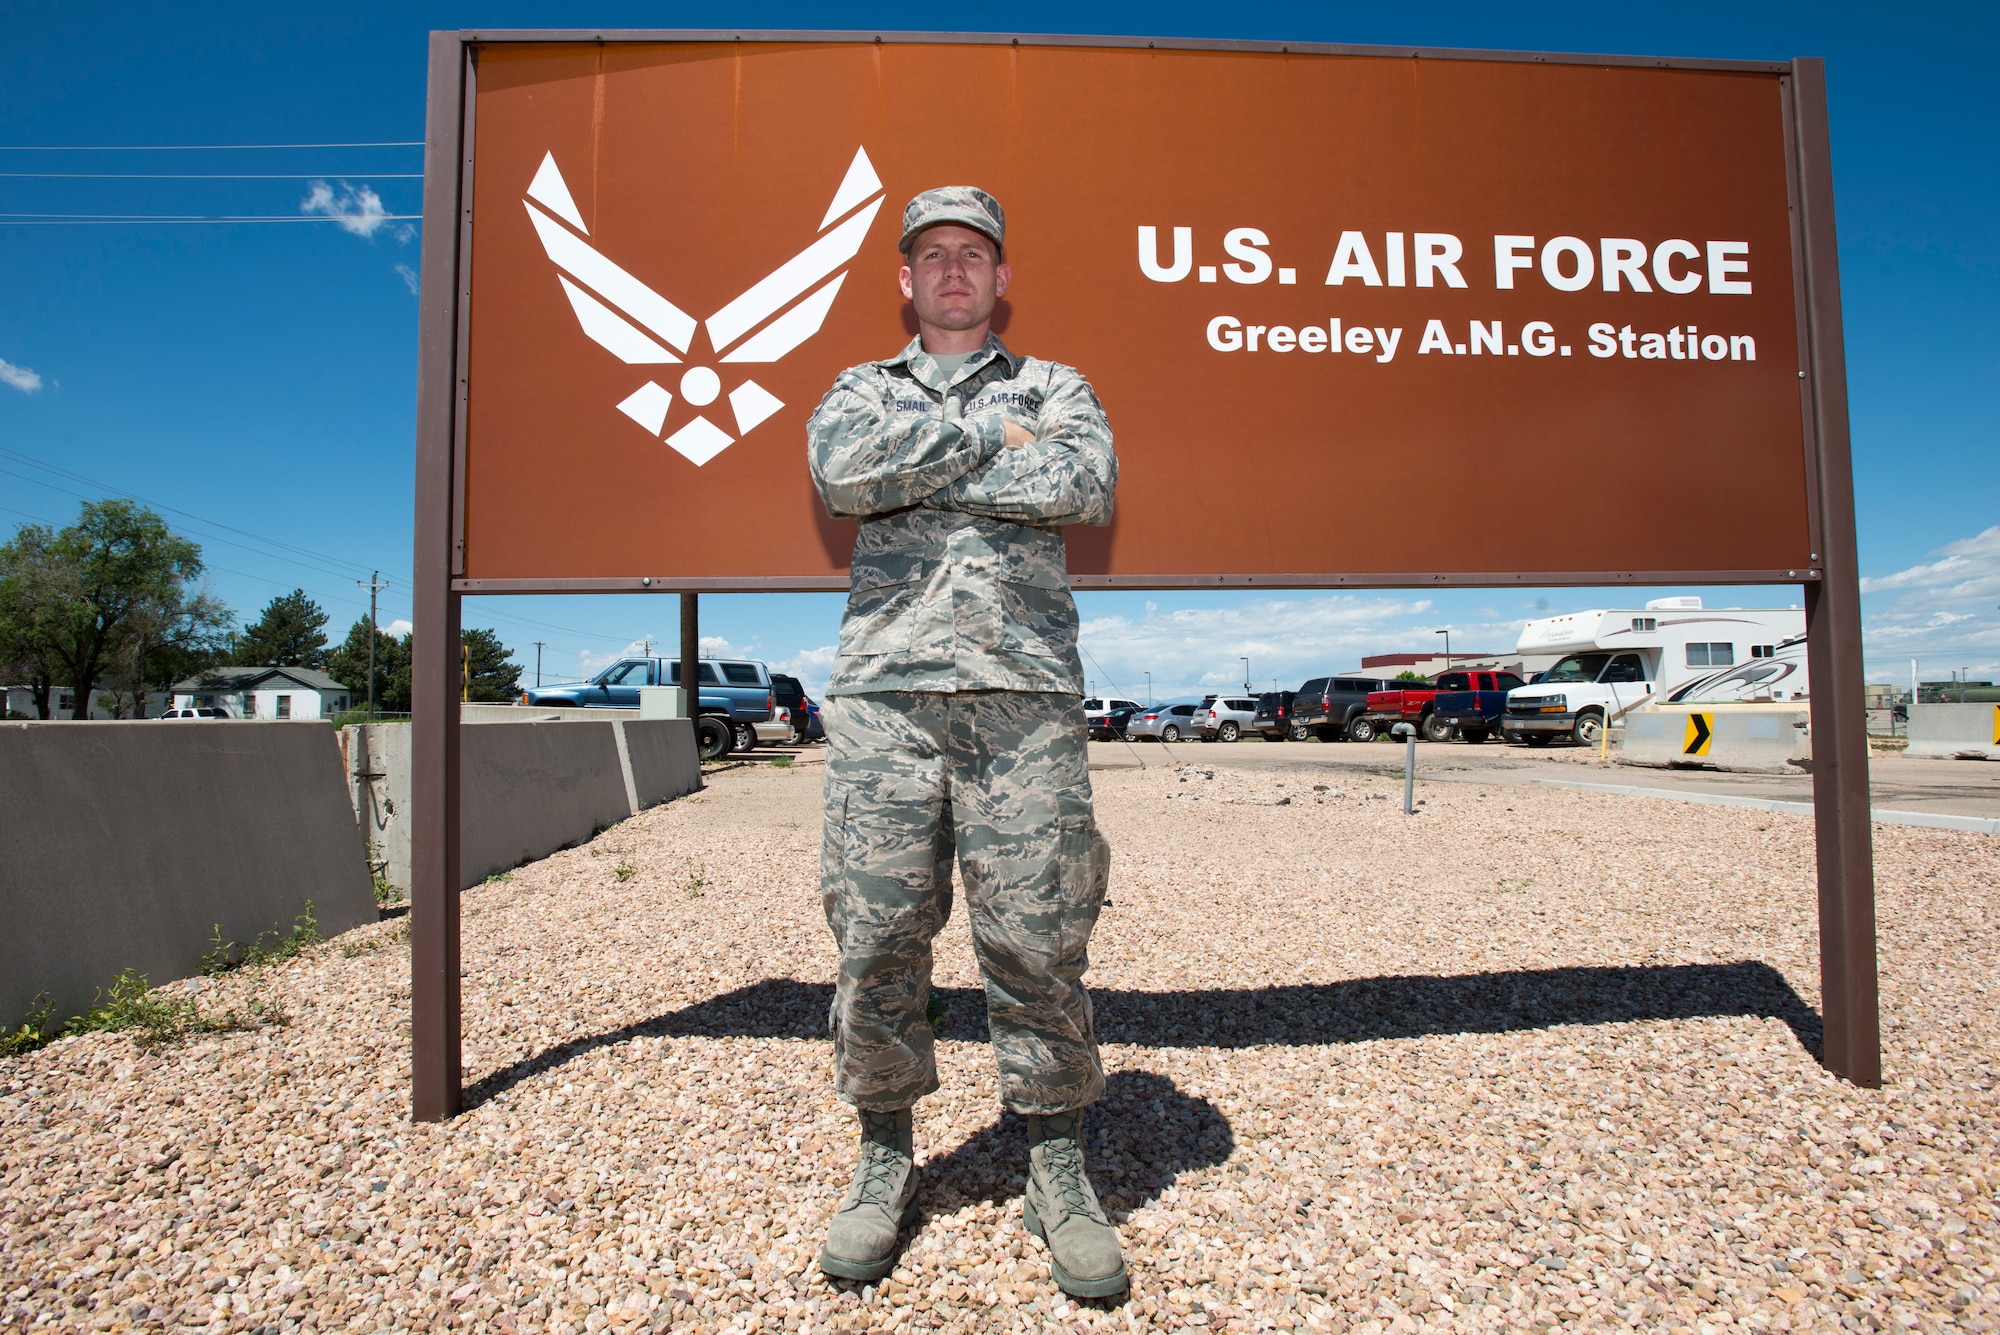 U.S. Air Force Senior Airman Jonathan R. Smail, a transmission technician from the 233rd Space Communications Squadron, Colorado Air National Guard, poses in front of the Greeley Air National Guard Station sign, Greeley, Colo., June 7, 2015. Smail, who troubleshoots and maintains satellite communications electronic equipment for the 233rd's one-of-a-kind mobile nuclear and missile launch tracking mission, won the 2014 Air National Guardsman of the year. (Air National Guard photo by Tech. Sgt. Wolfram M. Stumpf)